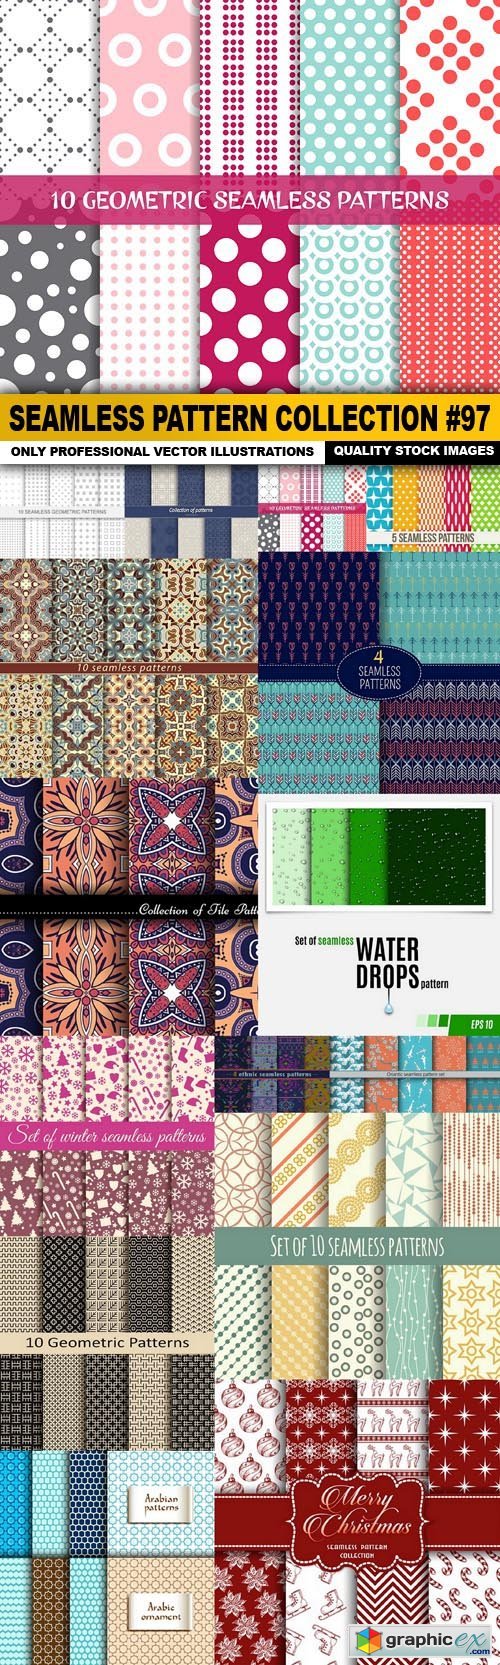 Seamless Pattern Collection #97 - 15 Vector